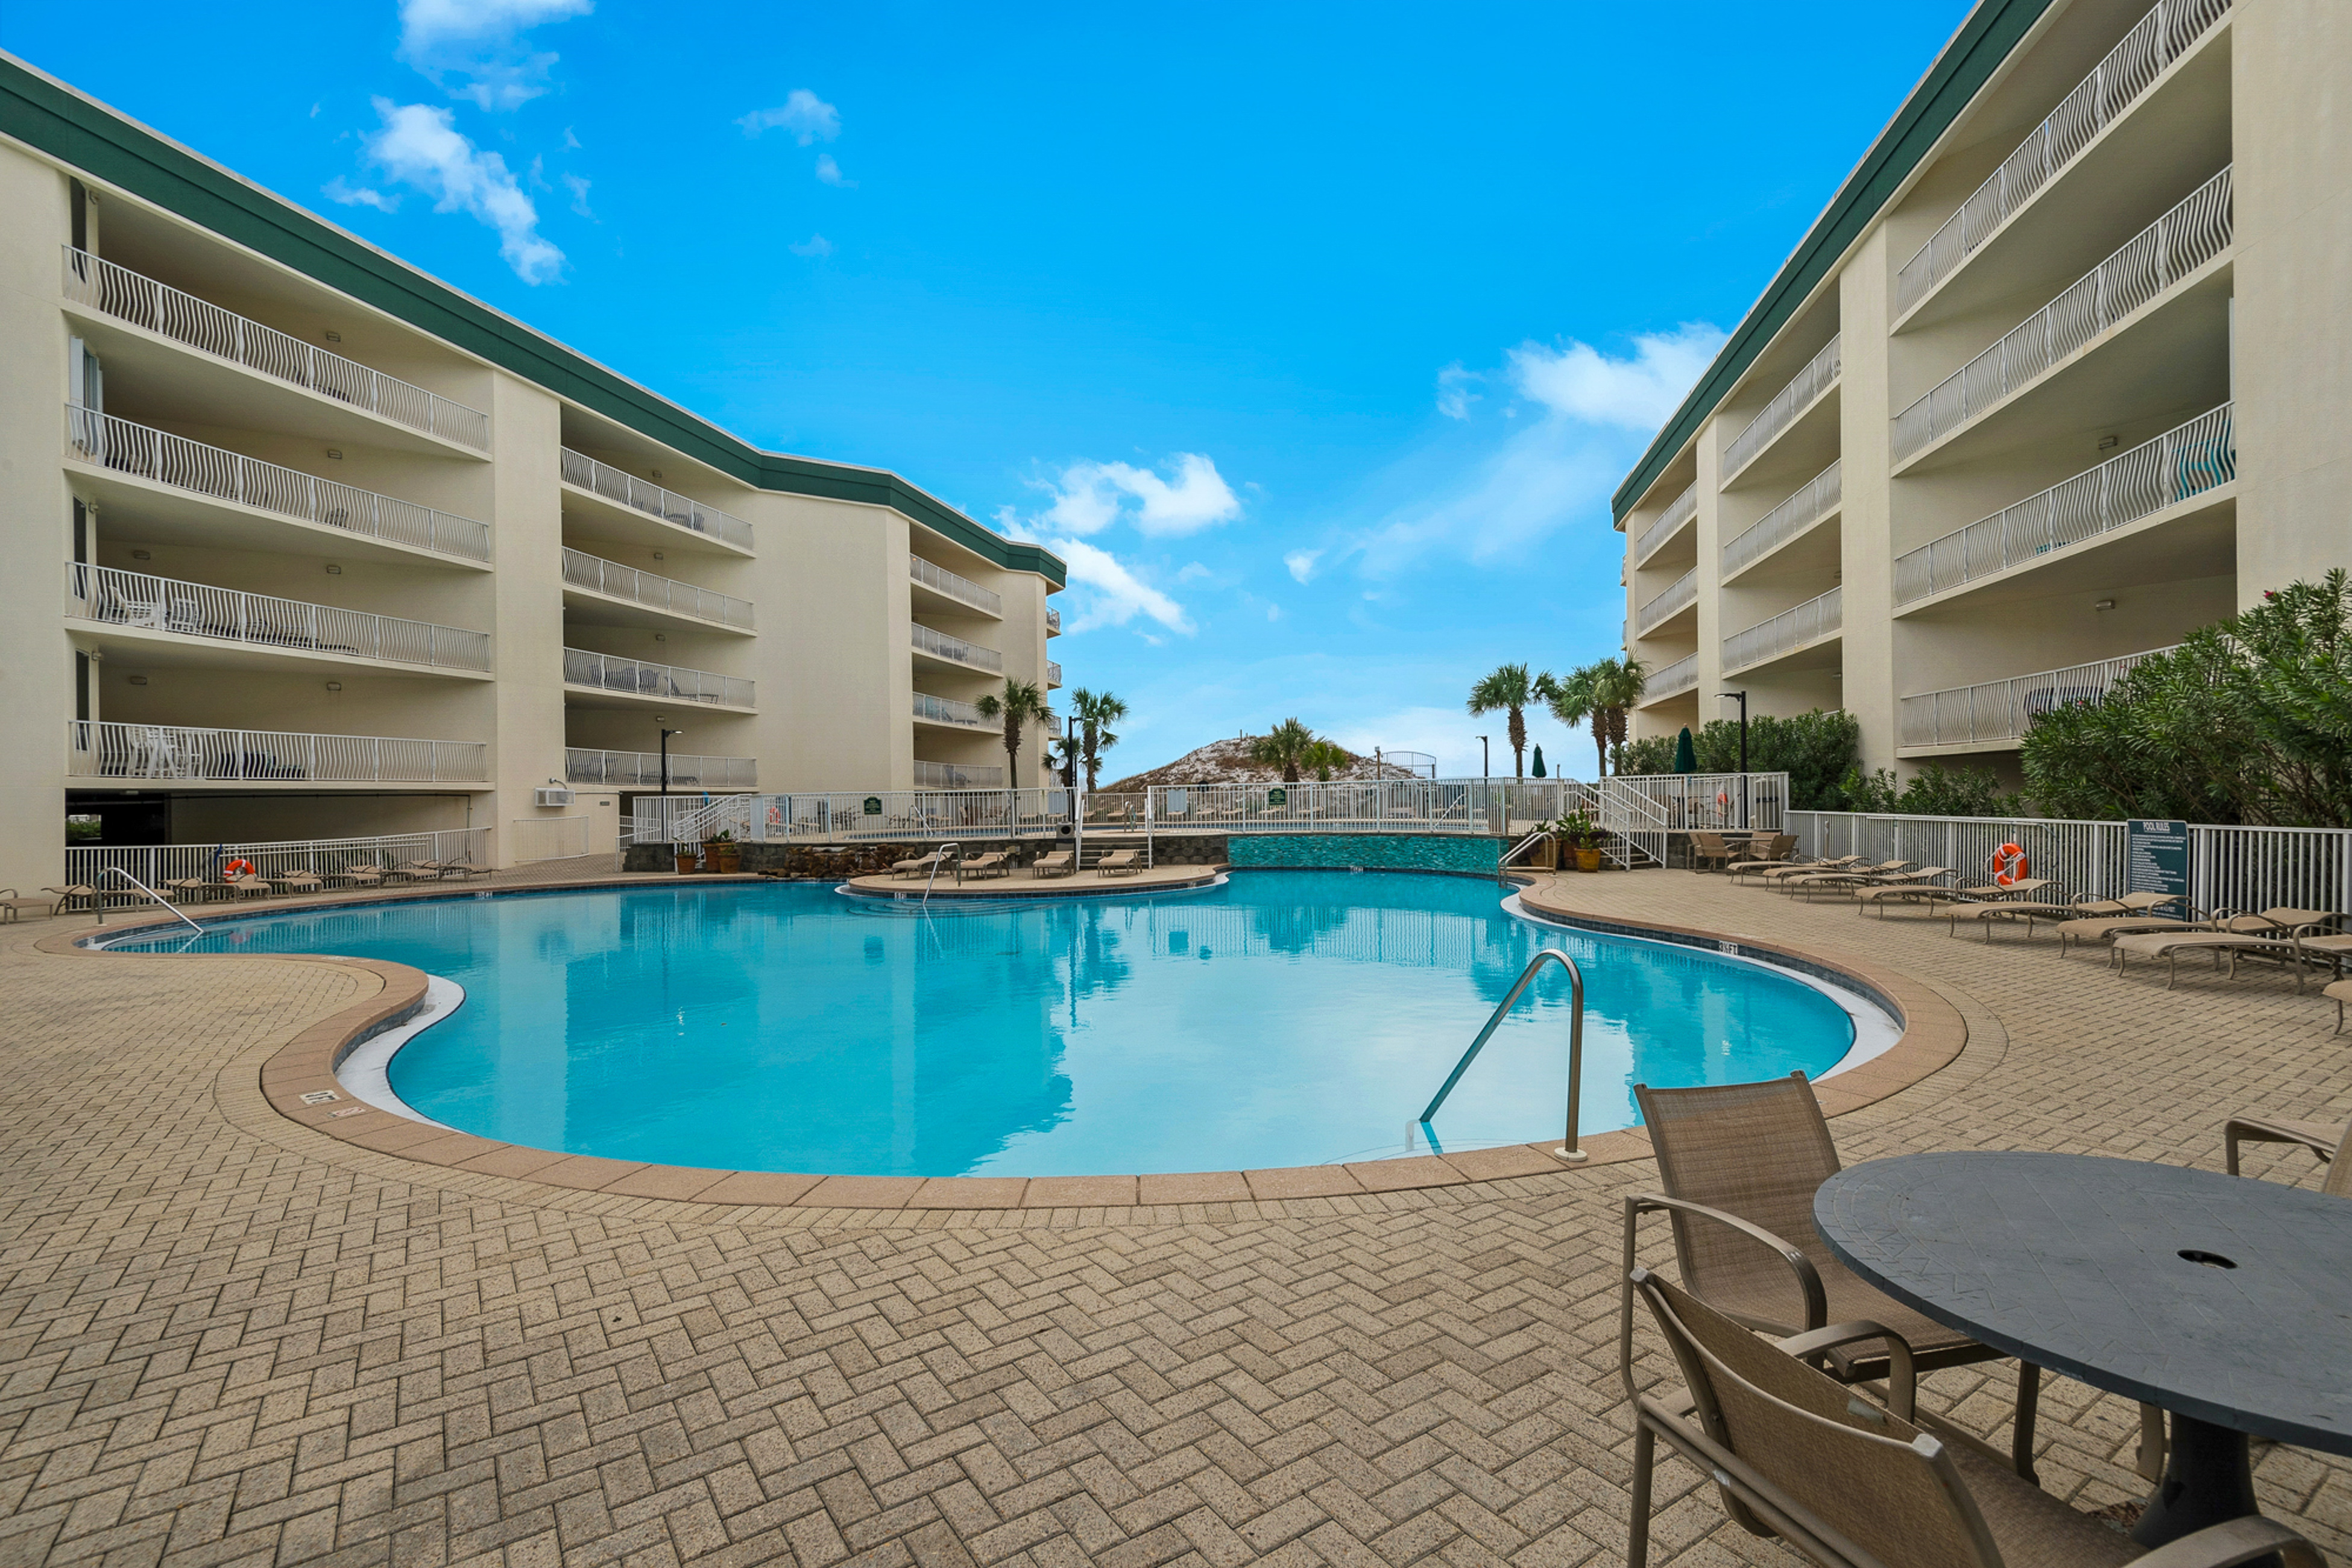 Dunes of Seagrove A104 Condo rental in Dunes of Seagrove in Highway 30-A Florida - #30